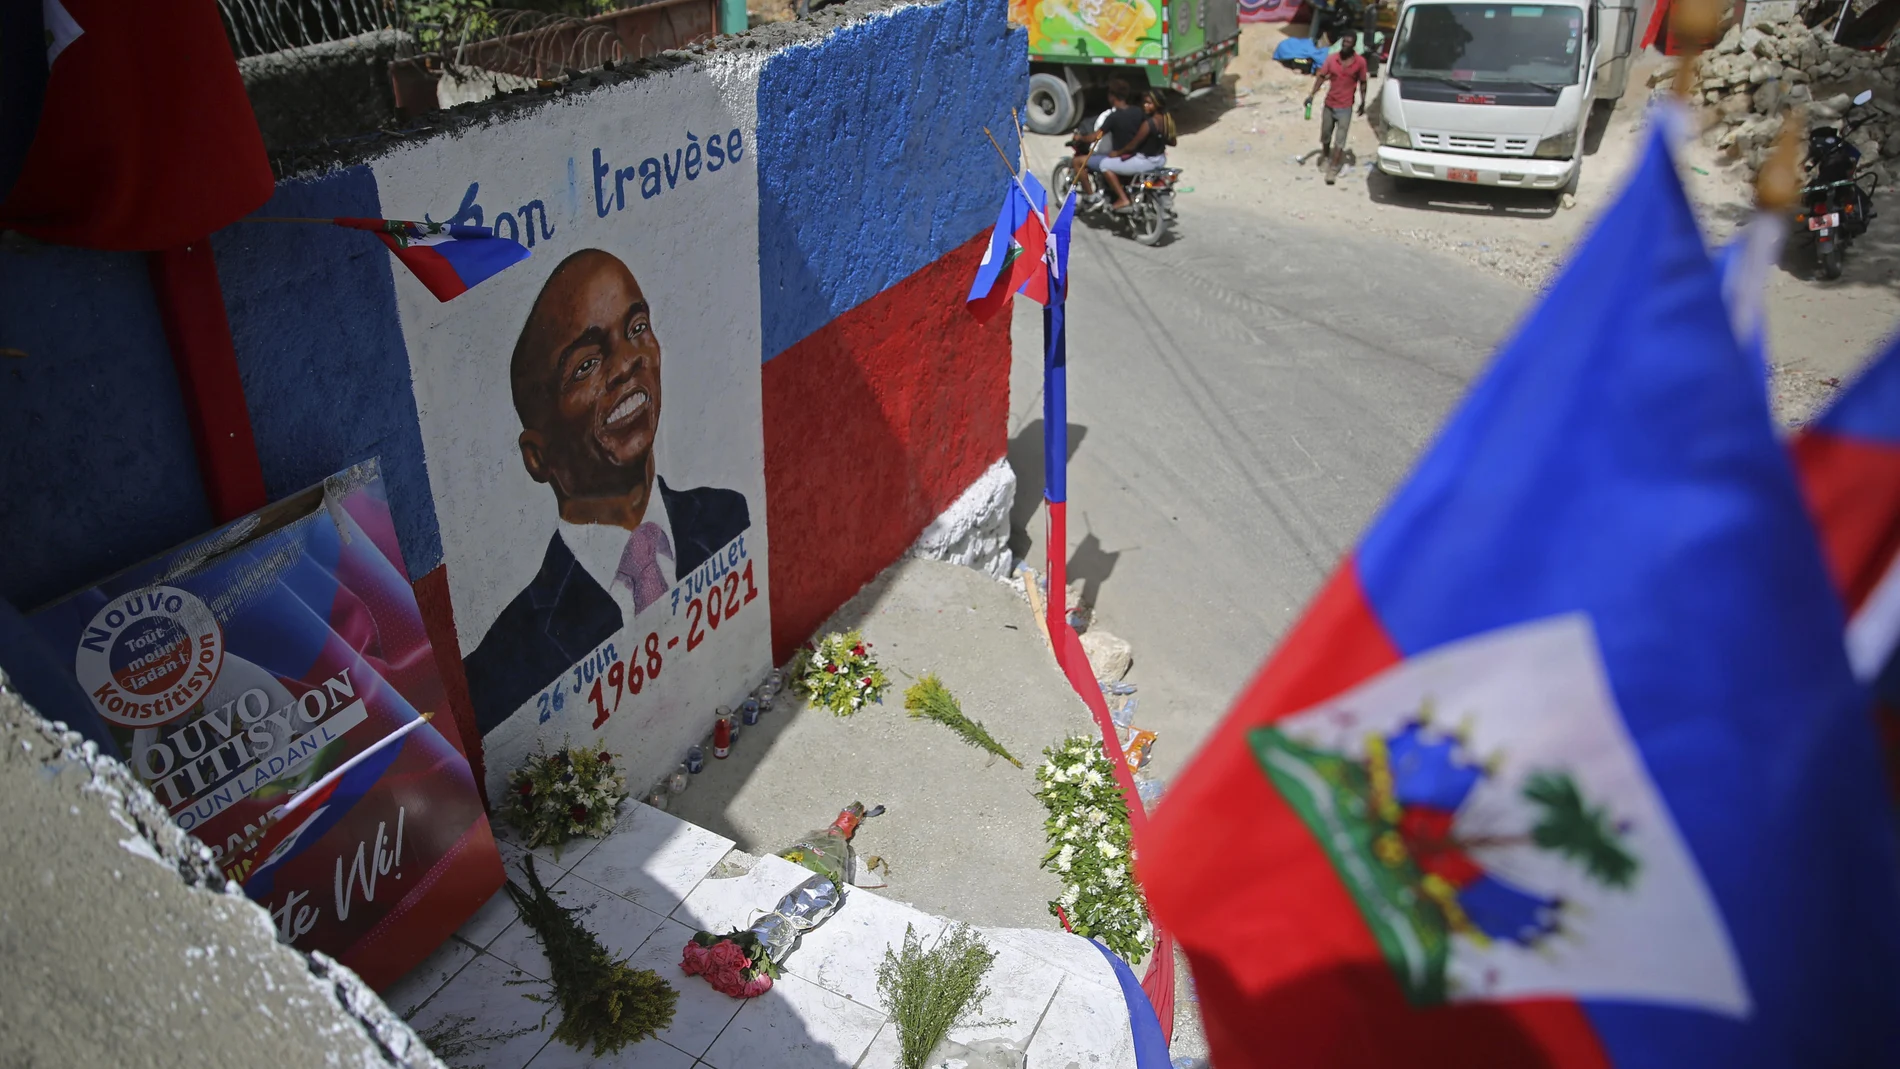 FILE - In this July 21, 2021 file photo, a mural depicting the late President Jovenel Moise adorns a wall in the Kenscoff neighborhood of Port-au-Prince, Haiti. A police superintendent in Jamaica told The Associated Press on Thursday, Oct. 21, 2021, that authorities have arrested a Colombian man they believe is a suspect in the July 7 assassination of Moise. (AP Photo/Joseph Odelyn)